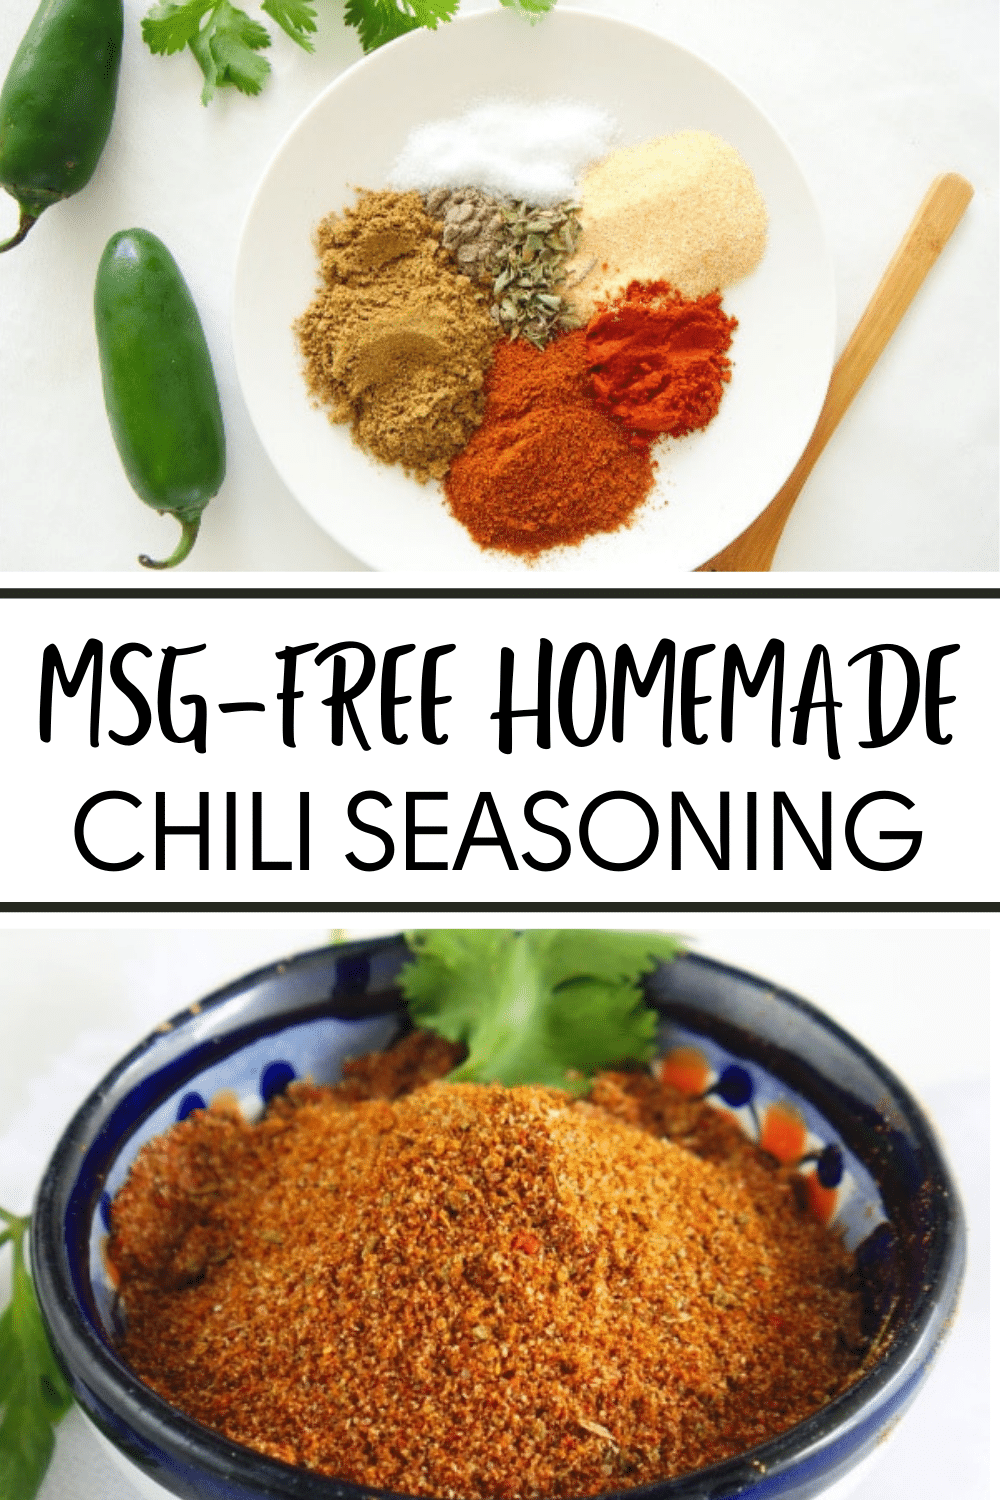 This Homemade Chili Seasoning is MSG-free and you can control how much salt you add to the mixture. A great seasoning mix for many different recipes. #chili #seasoningmix #homemadeseasoningmixes via @wondermomwannab